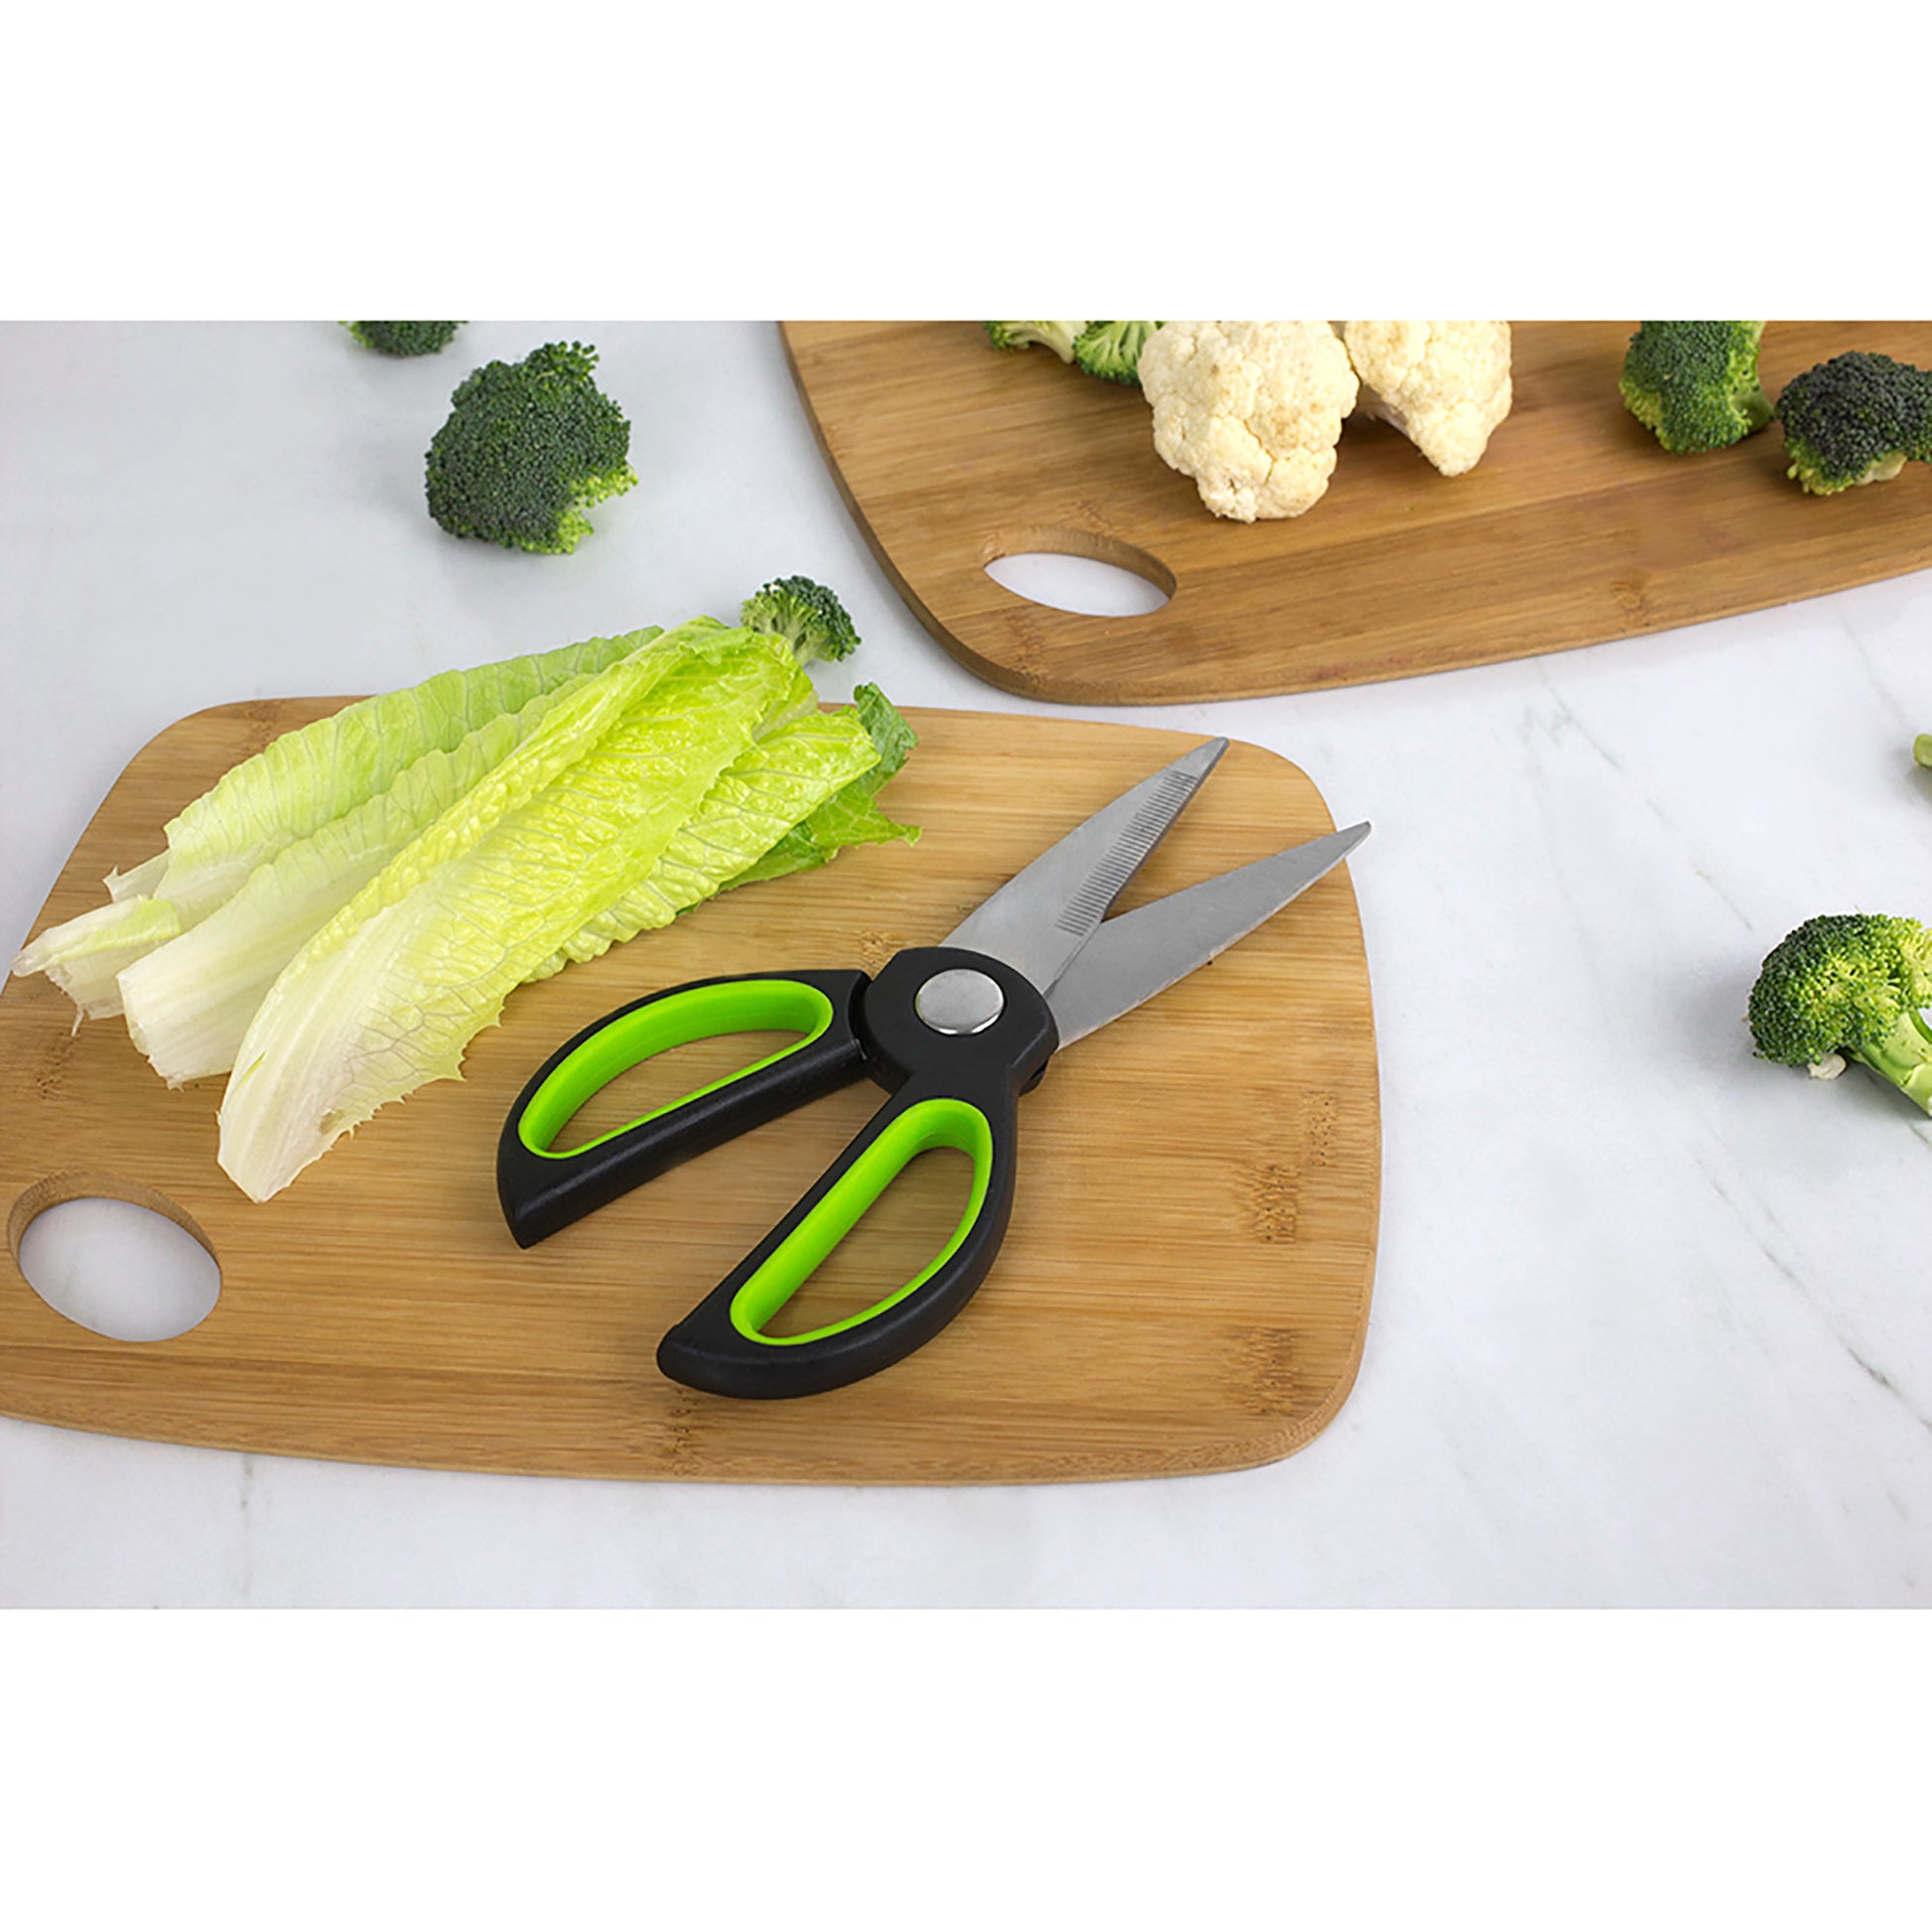 Home Basics Kitchen Shears with Silicone Grip Handles - Green